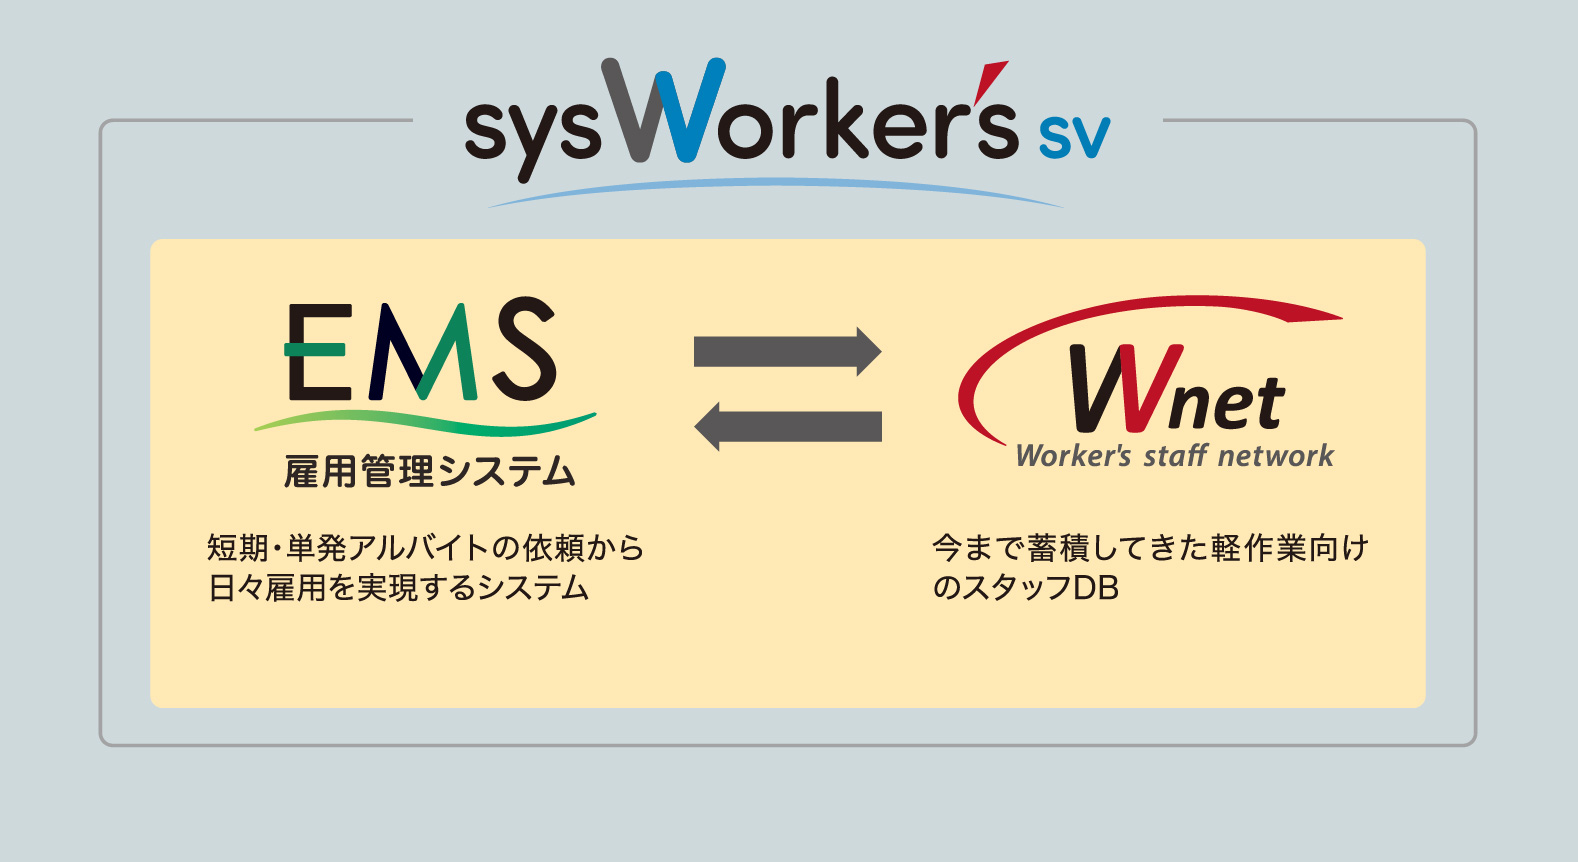 sysWorker's sv